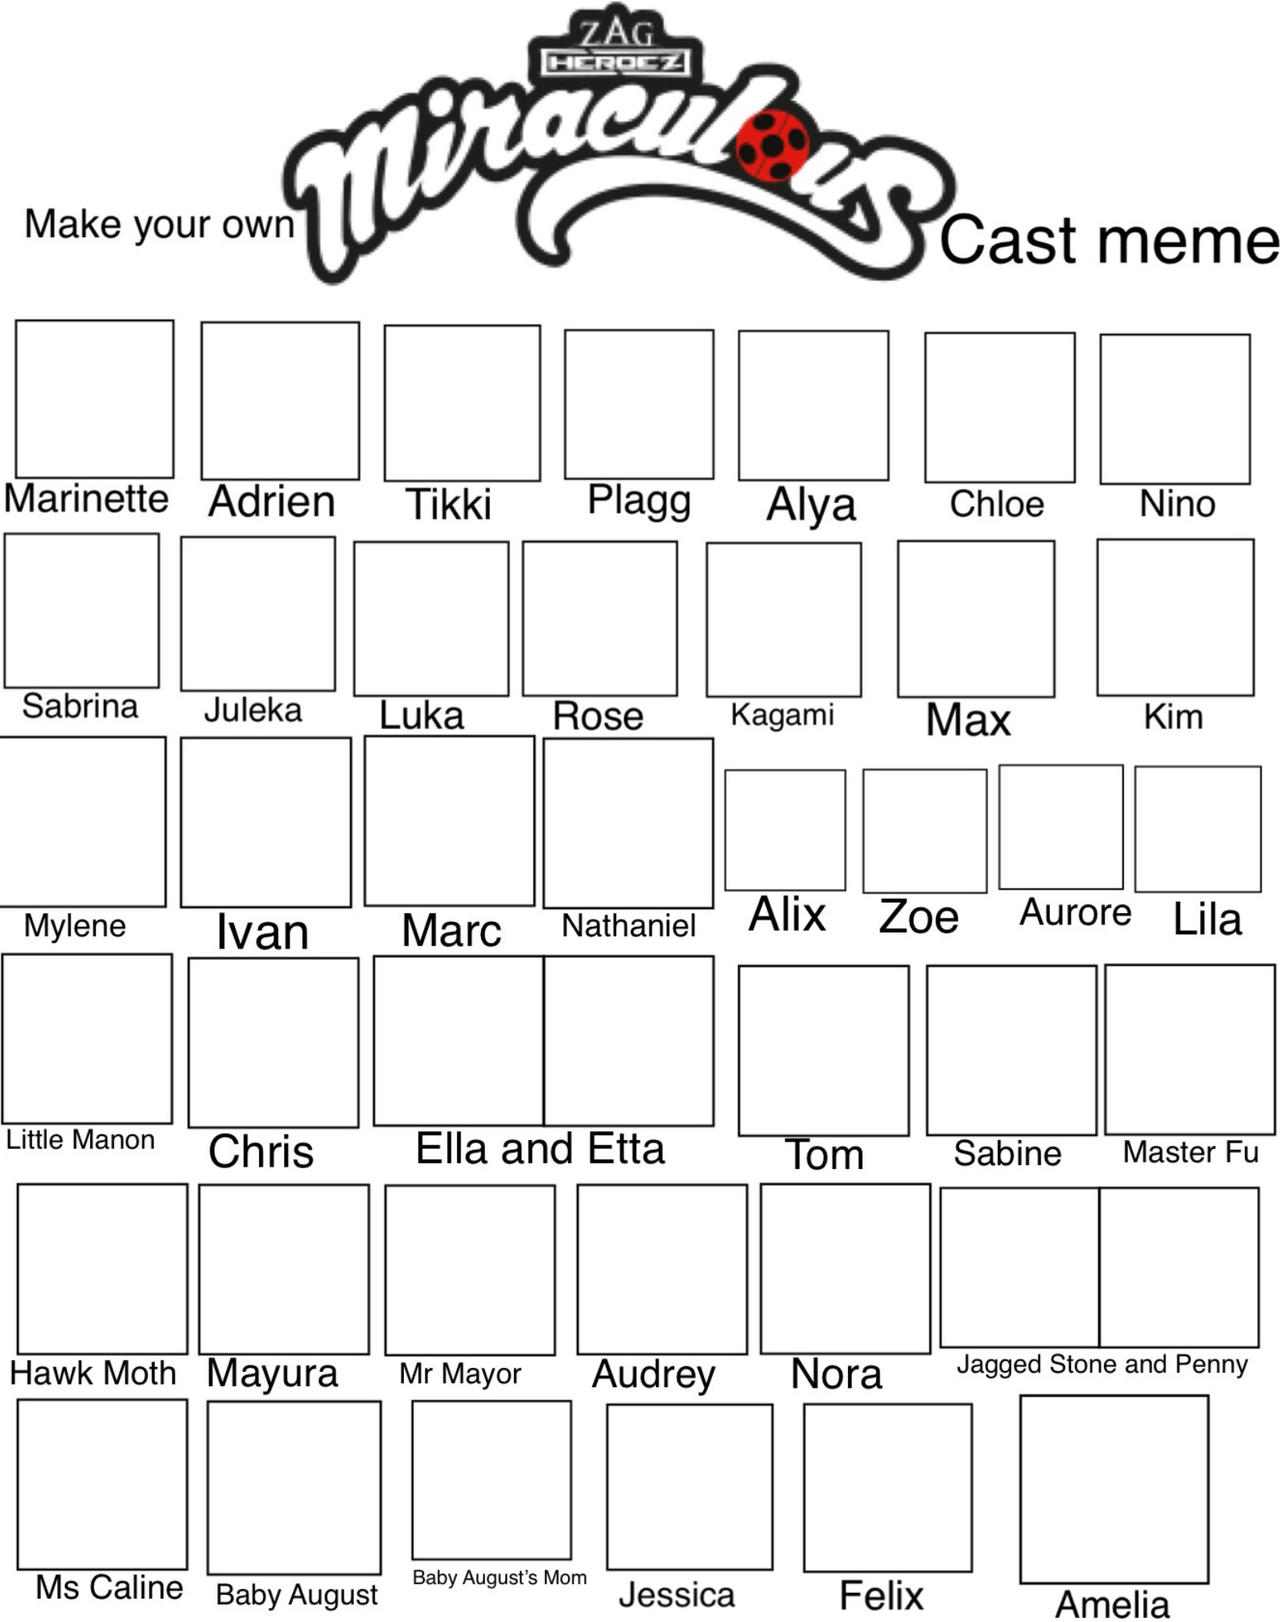 Make your own AwesomeKela1234 Cast Meme template by